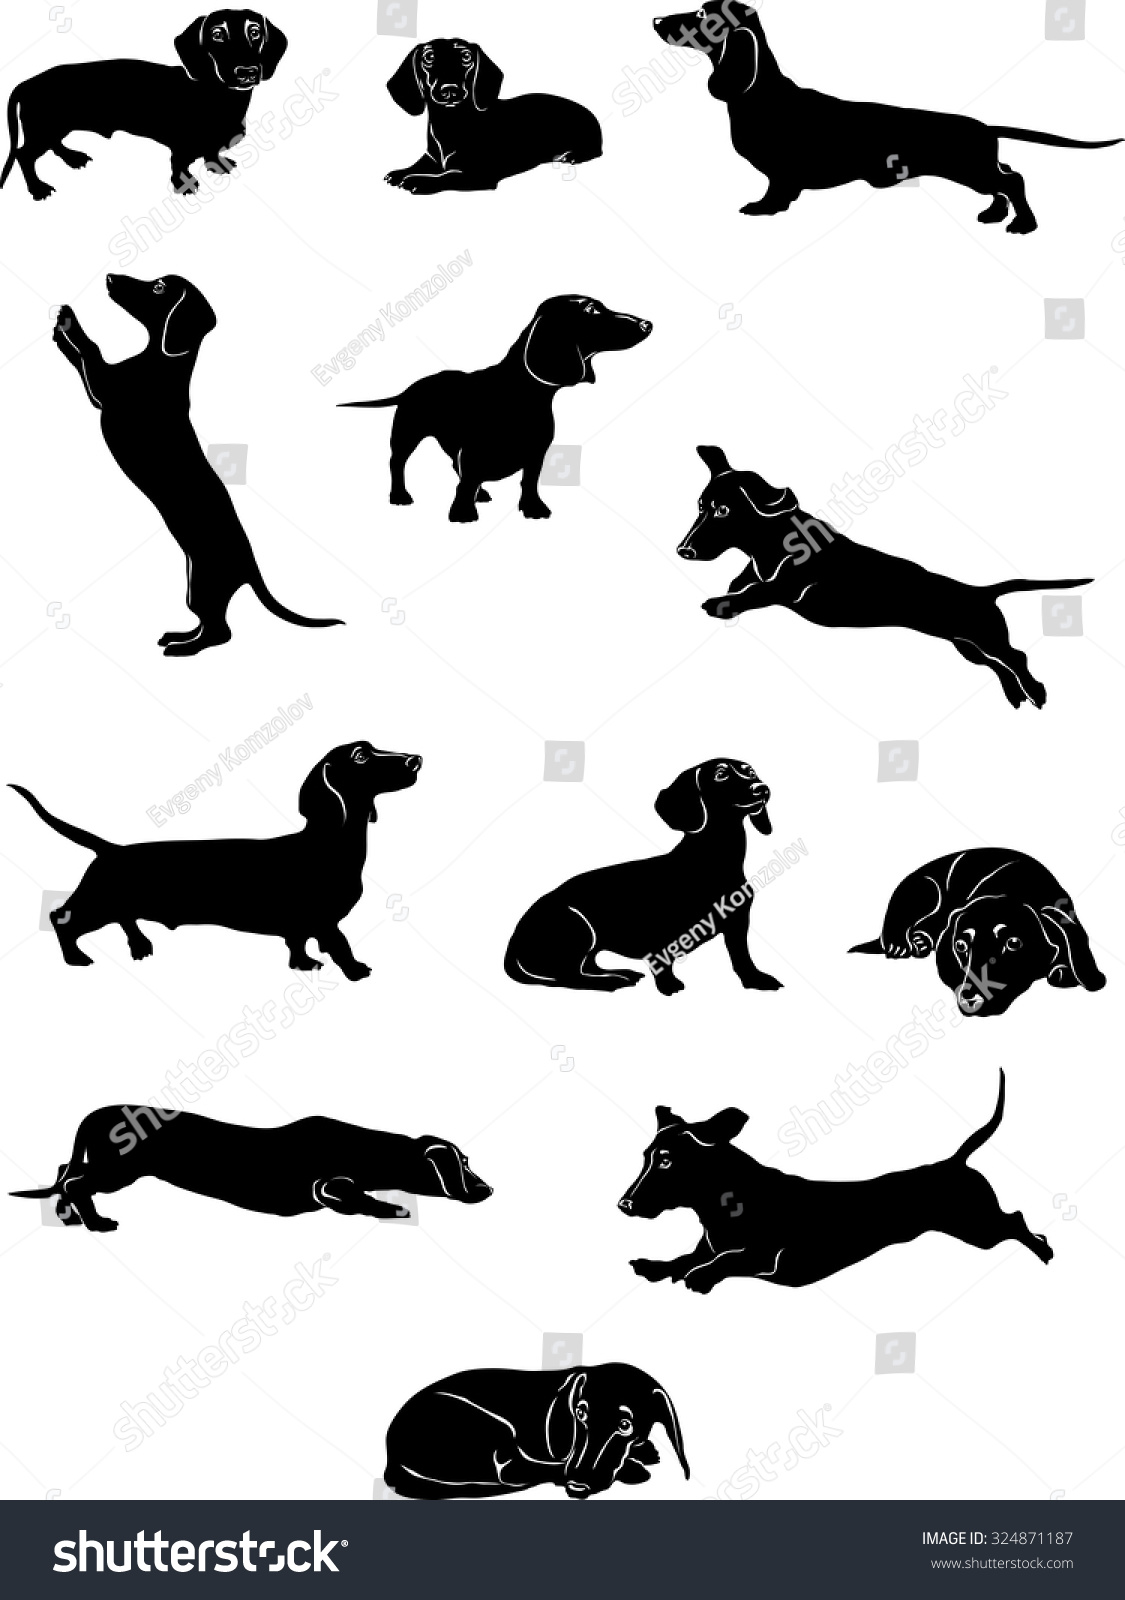 SVG of Dachshund, dachshund figure, vector, different positions, illustration, black and white, silhouette svg